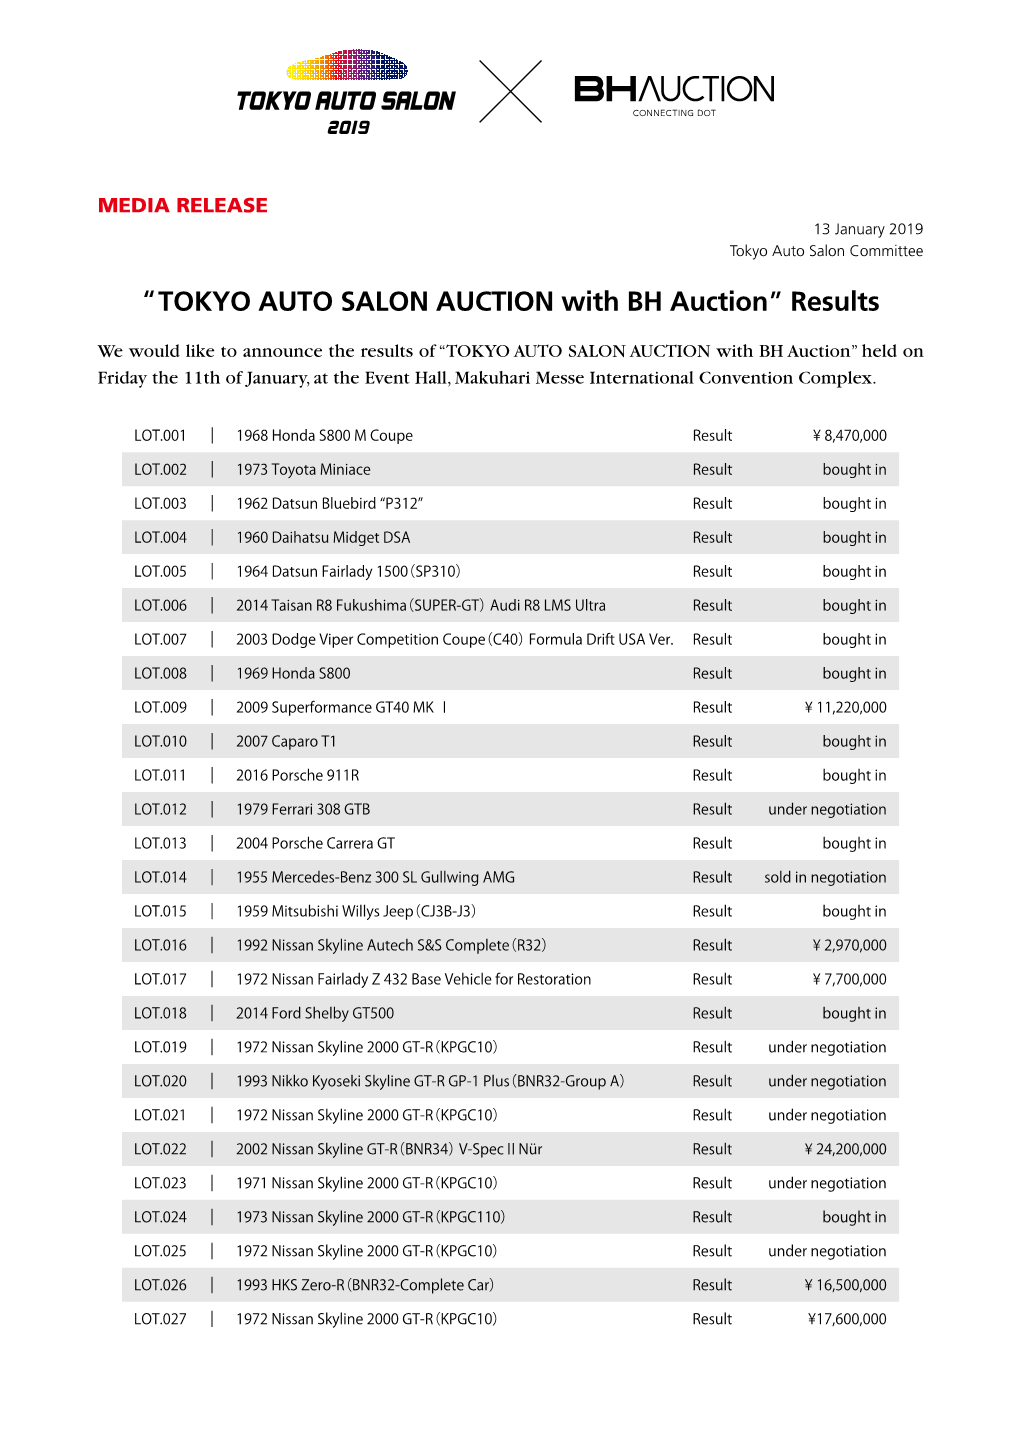 “TOKYO AUTO SALON AUCTION with BH Auction” Results